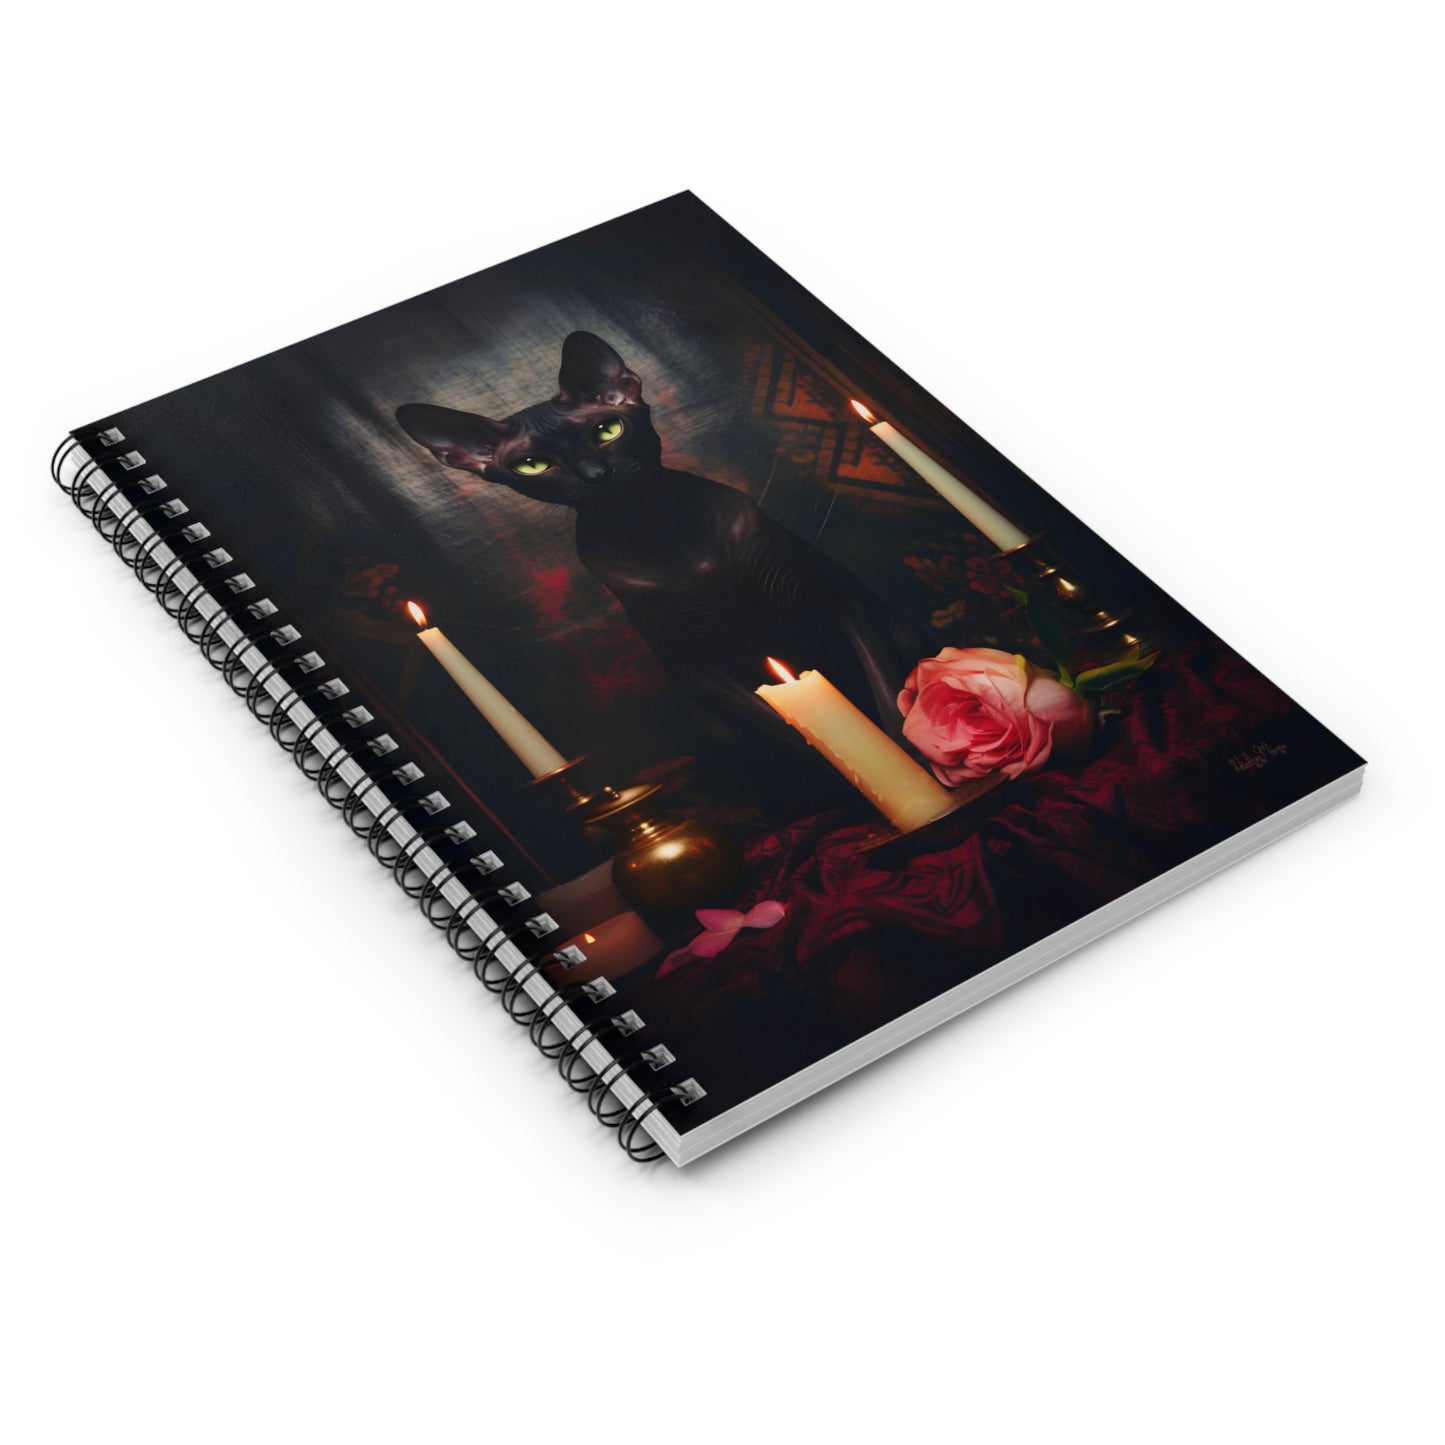 Velvety Black Sphynx with Candles | Ruled Line Spiral Notebook